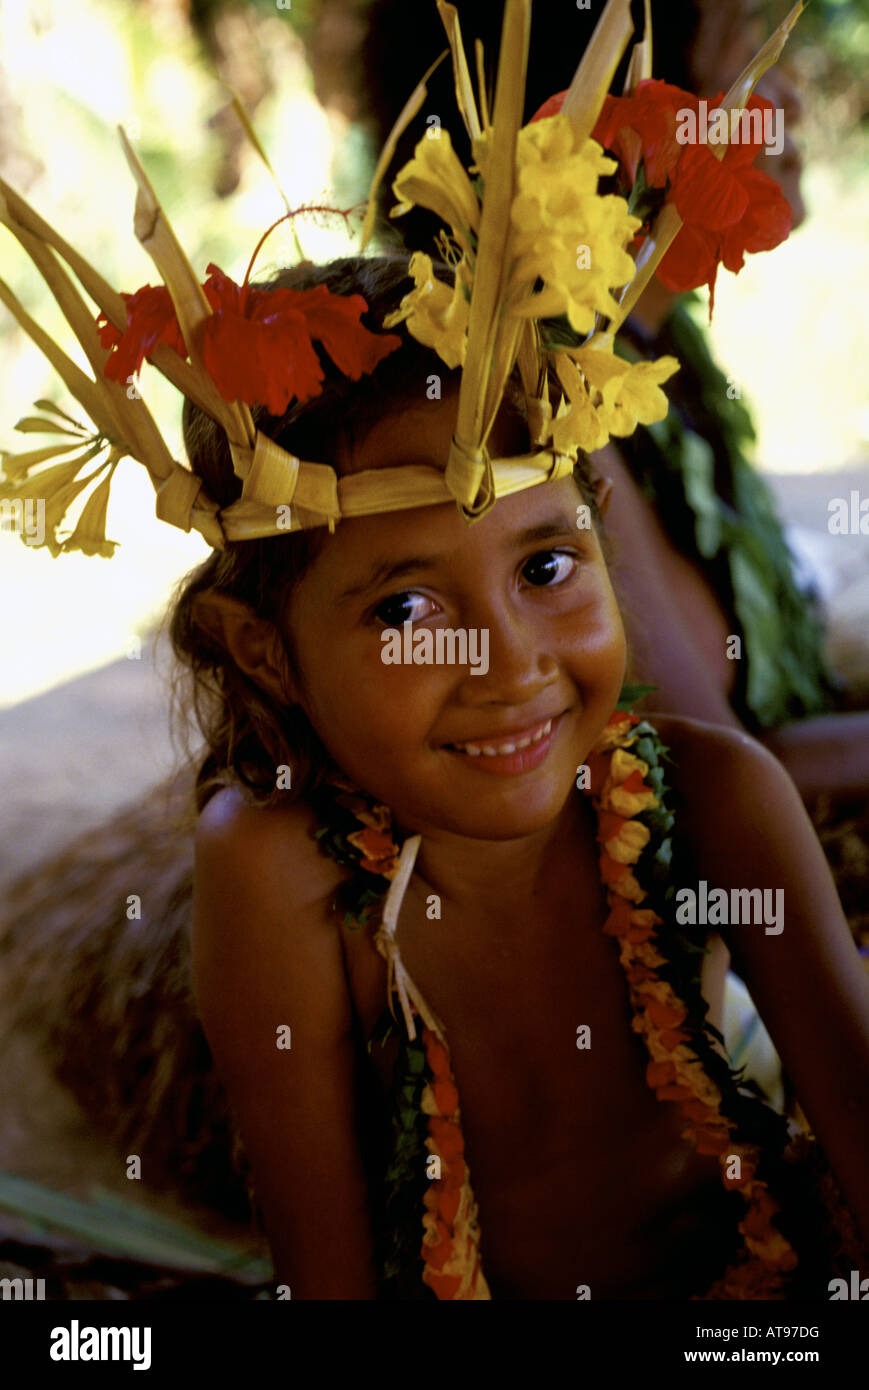 Young native girl wearing traditional ceremonial costume prepares for dance in Ma Village, Yap, Micronesia. Stock Photo